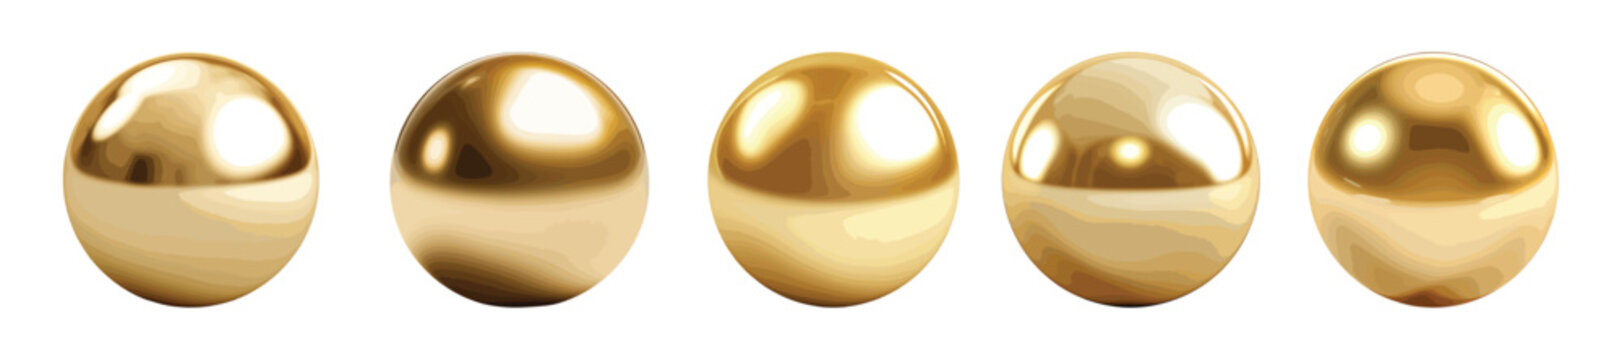 Metallic gold ball vector set isolated on white background